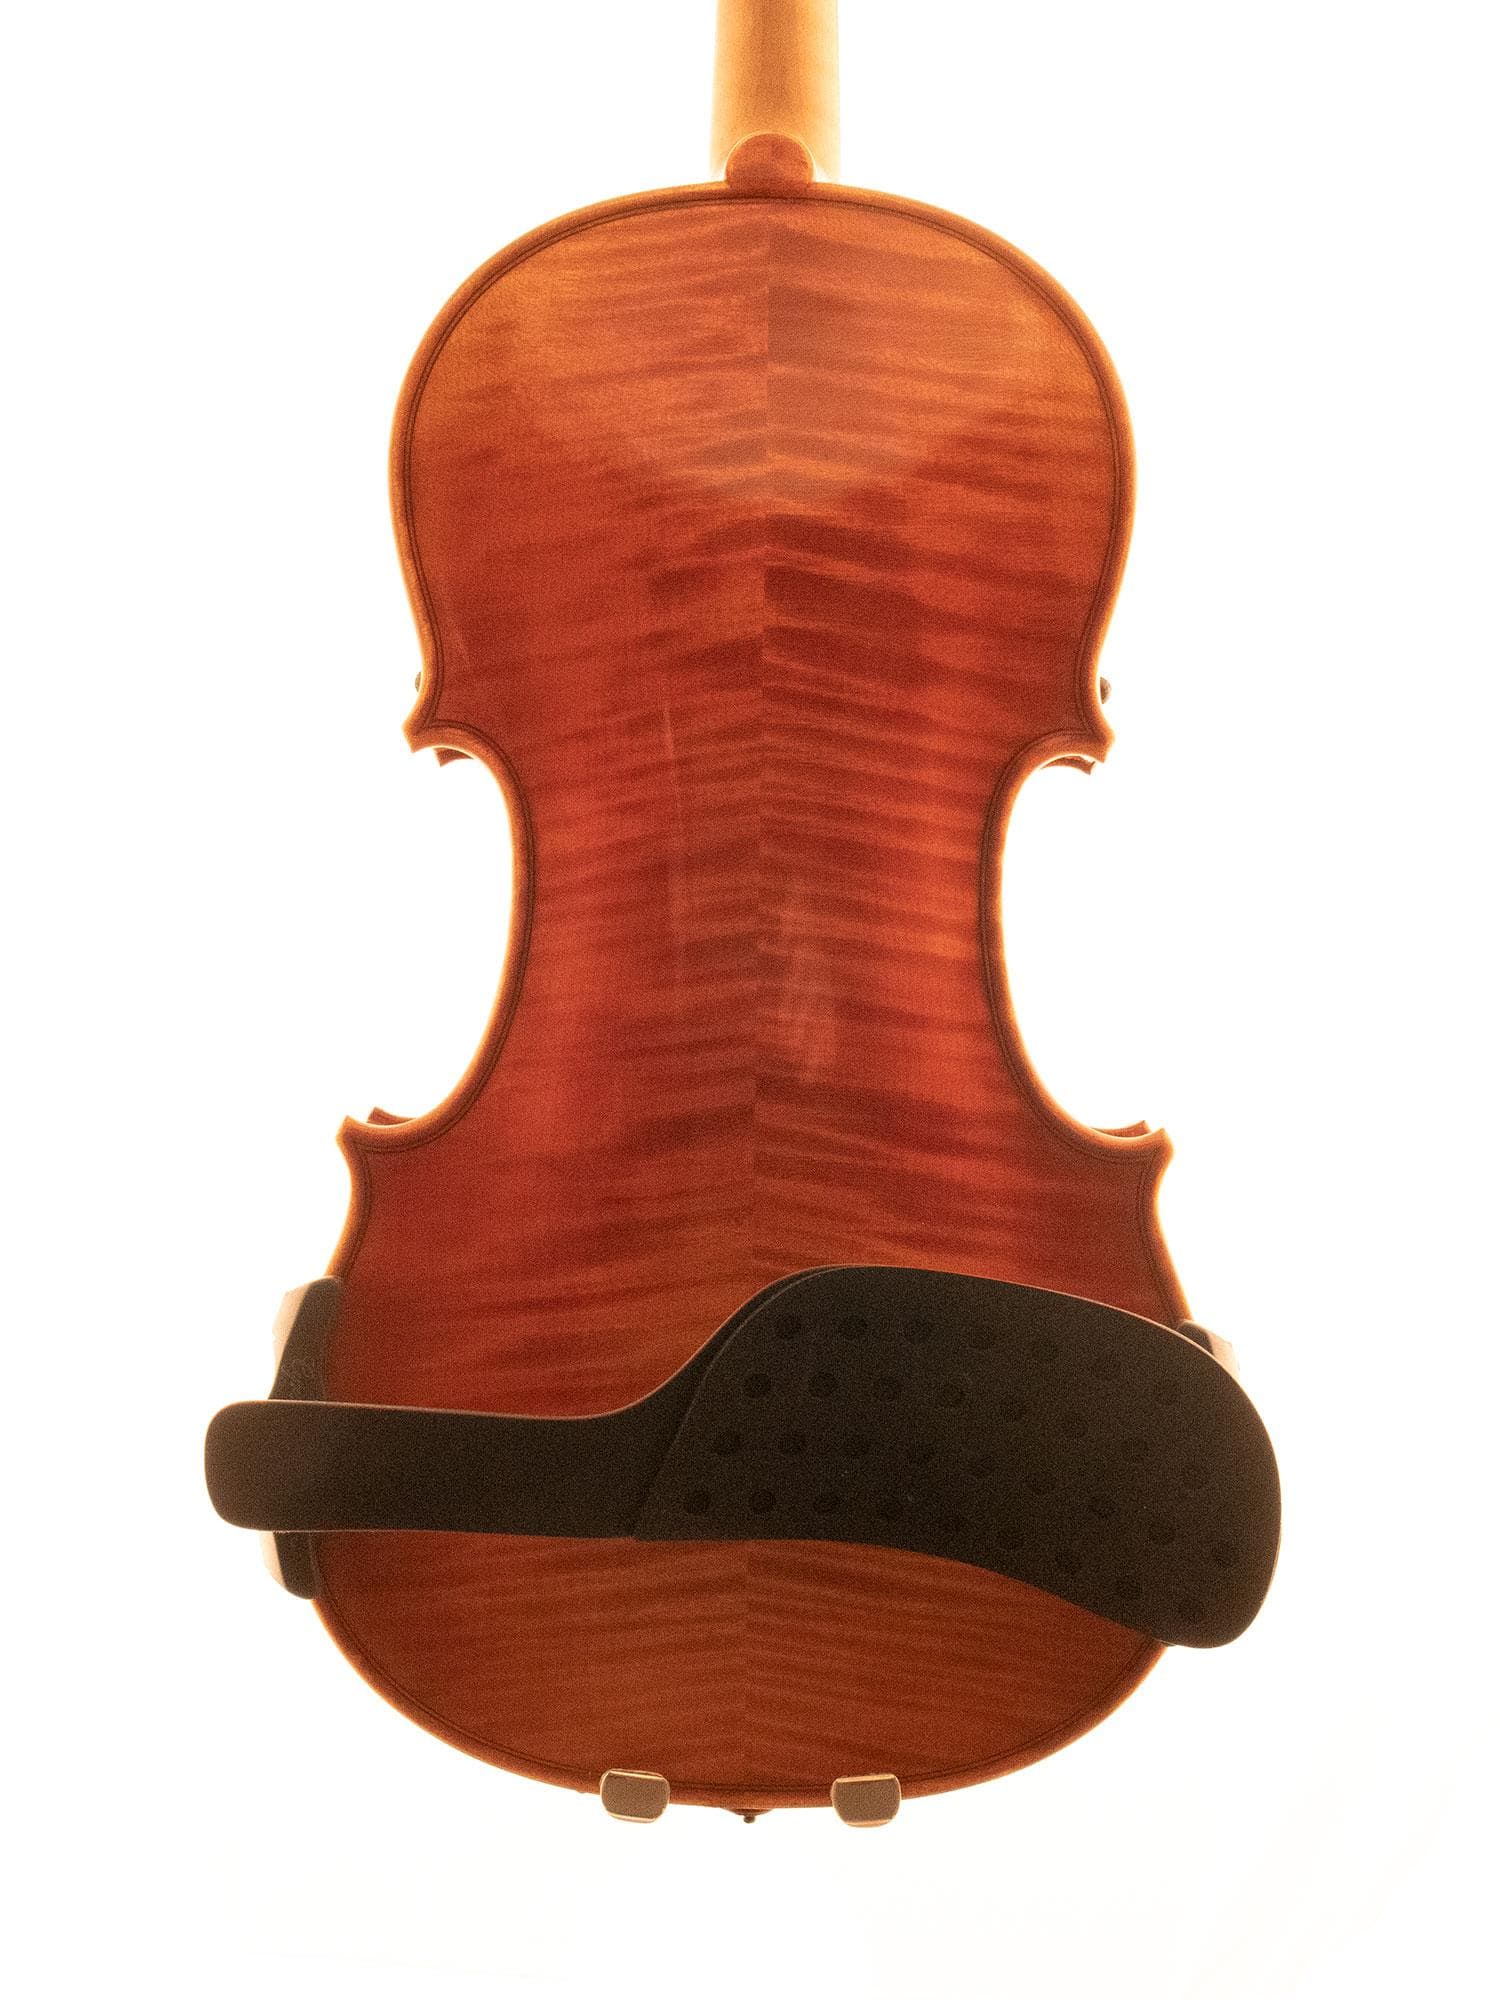 Performa Thermoplastic Polymers Violin Shoulder Rest in 4/4 Size